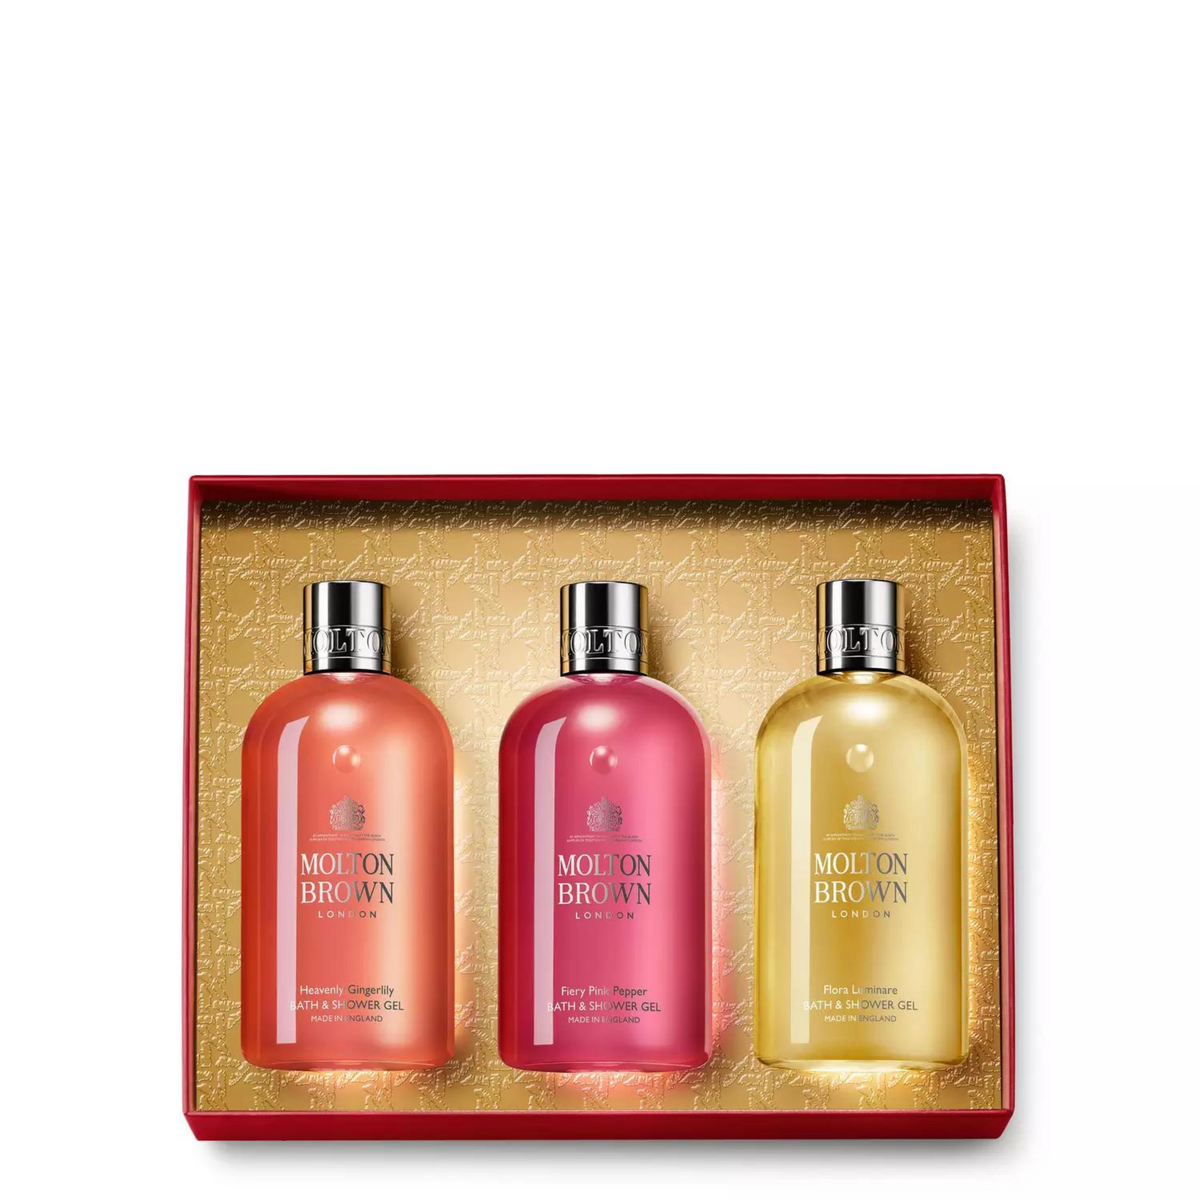 Primary Image of Floral & Spicy Body Care Collection Trio